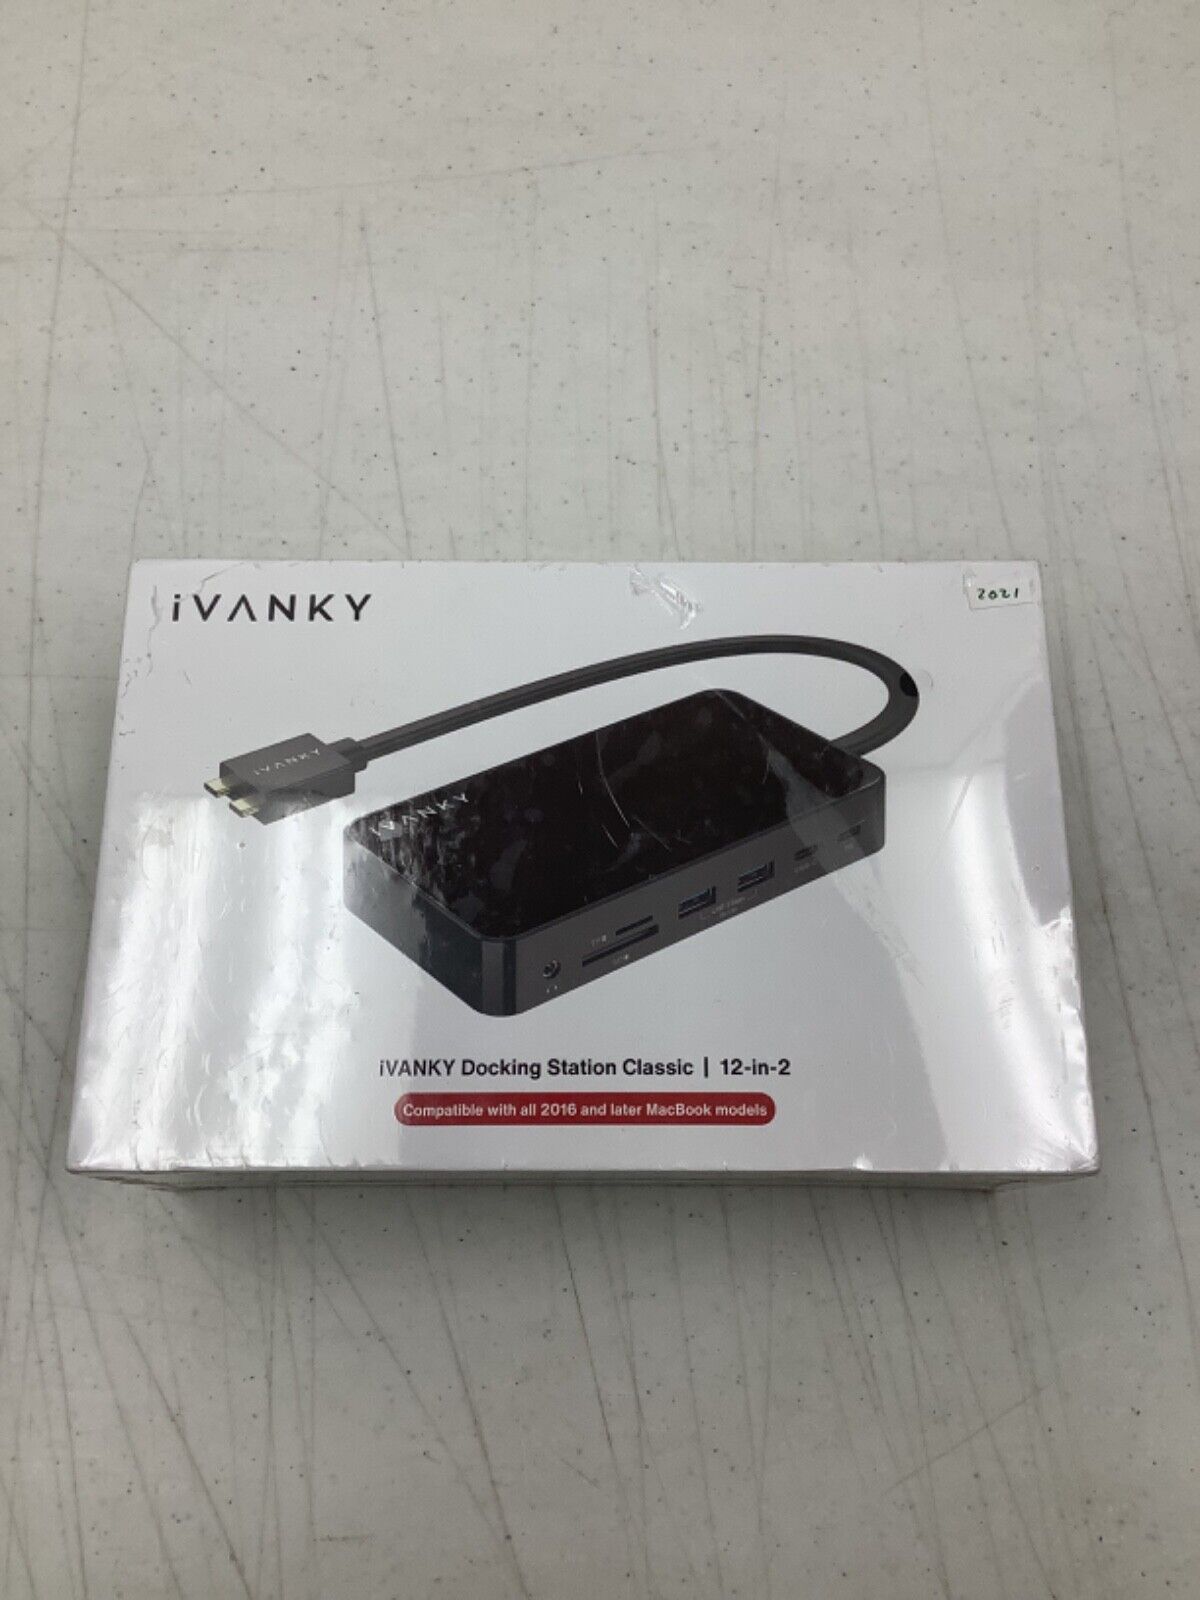 IVANKY Docking Station Classic 12-in-01